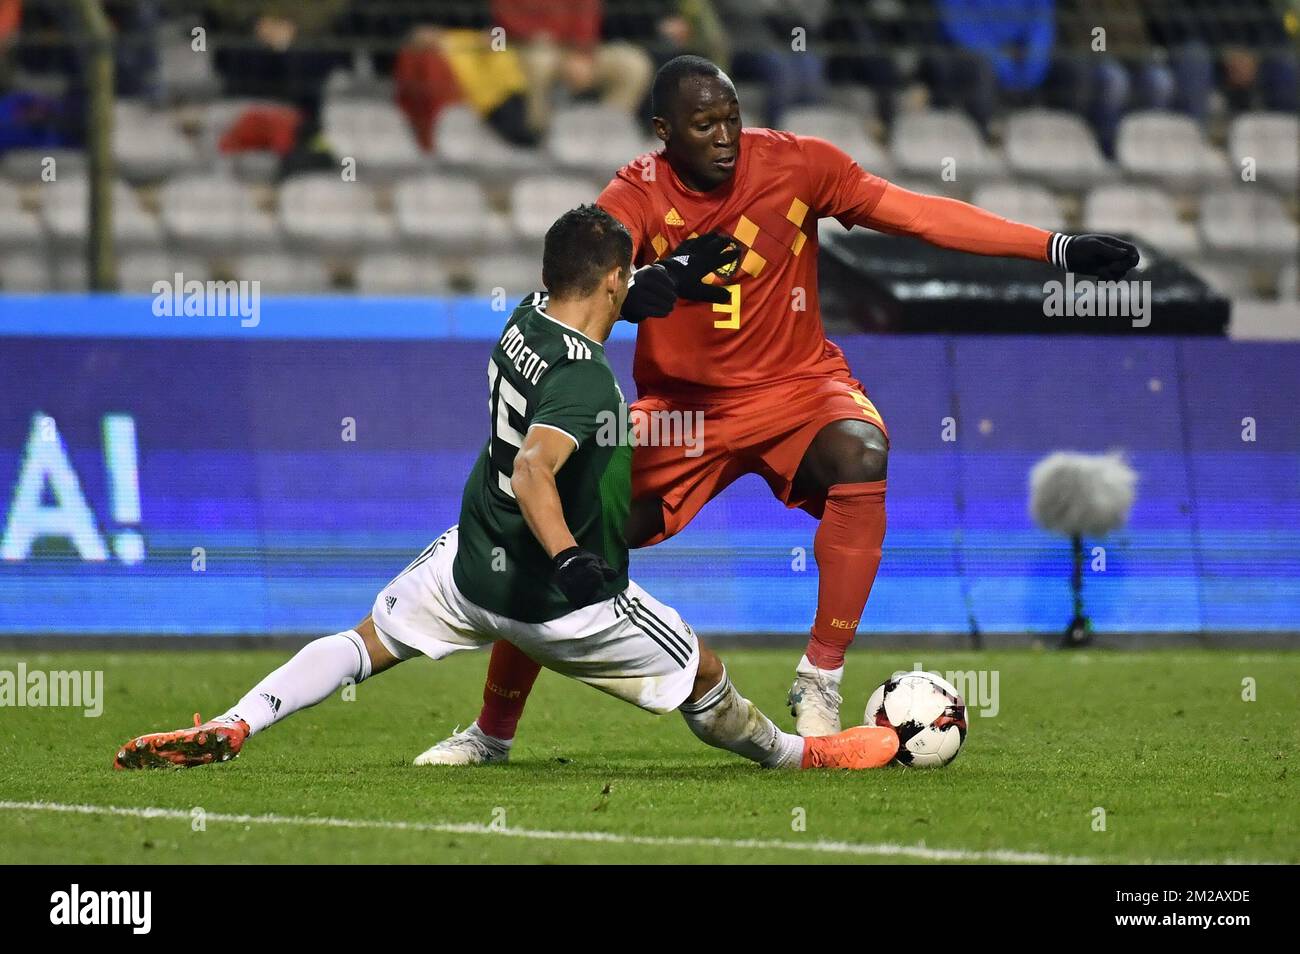 Mexico's Hector Moreno and Belgium's Romelu Lukaku pictured in action during a friendly soccer game between Belgian national team Red Devils and Mexico, Friday 10 November 2017, in Brugge. BELGA PHOTO DIRK WAEM Stock Photo